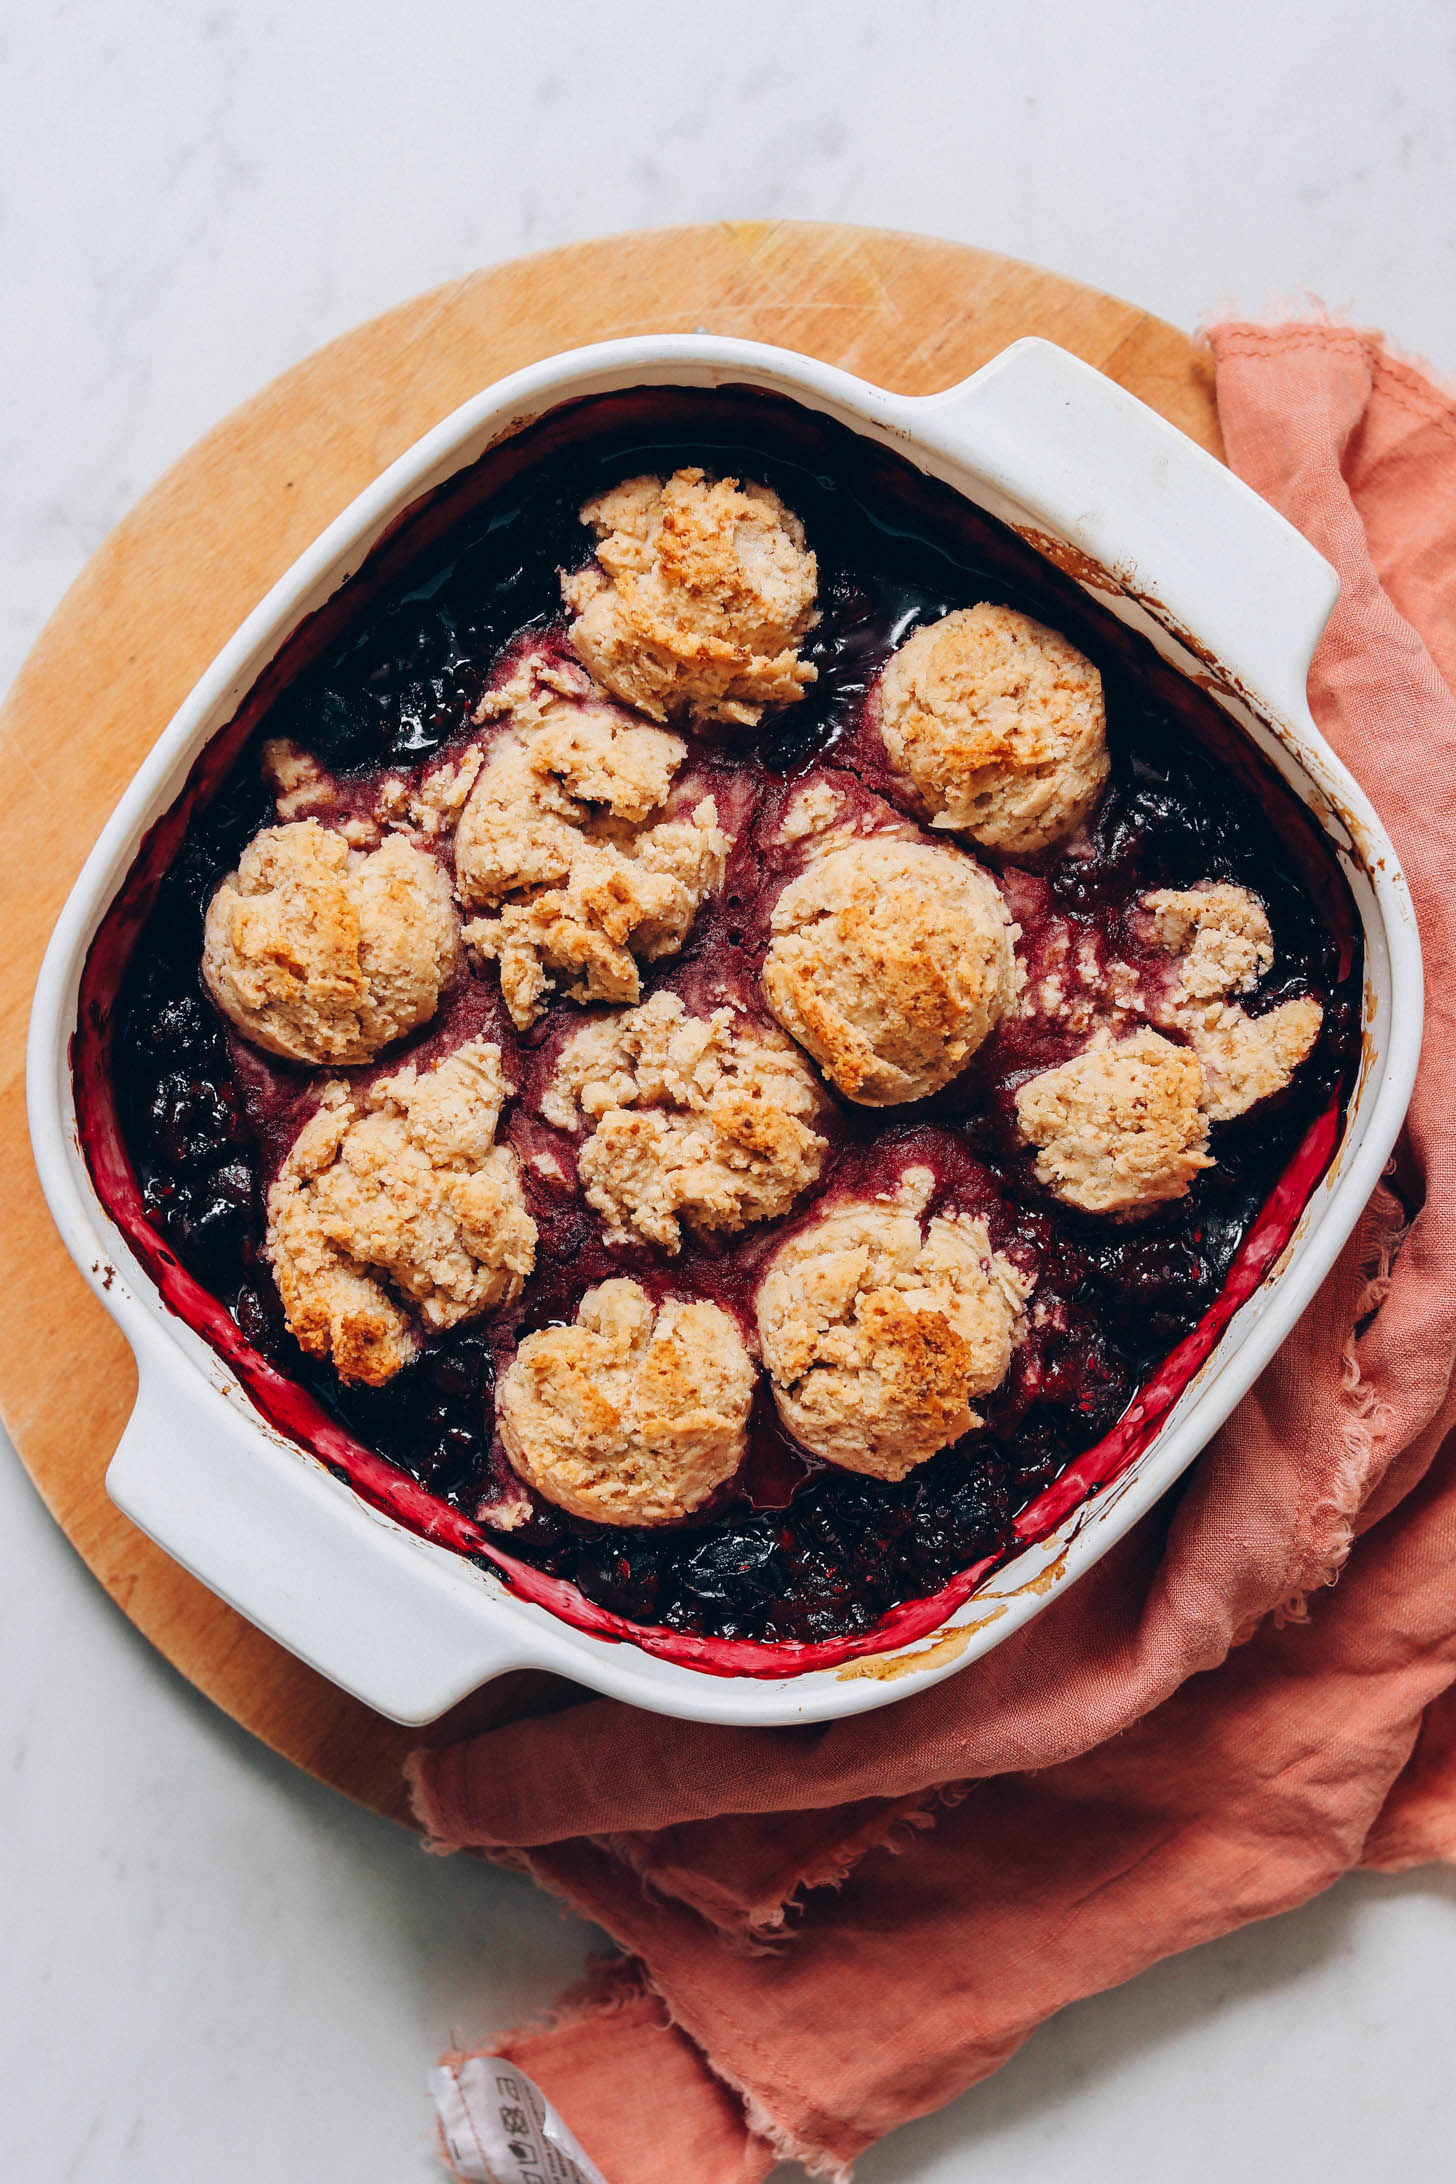 Mixed berry cobbler topped with flaky gluten-free biscuits